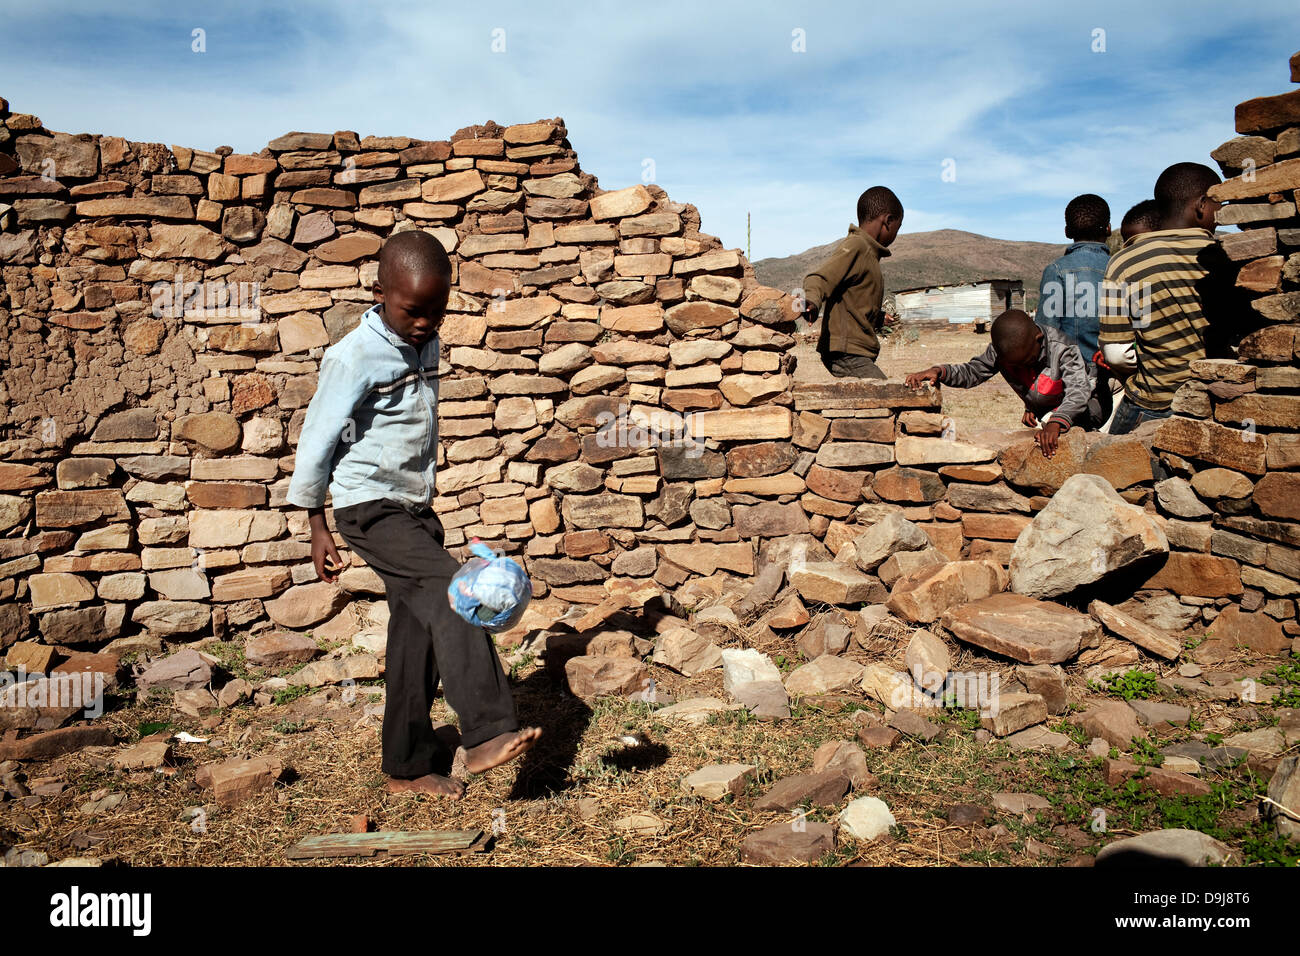 Young boy practices his football skills using a makeshift soccer ball in rural Transkei, South Africa Stock Photo